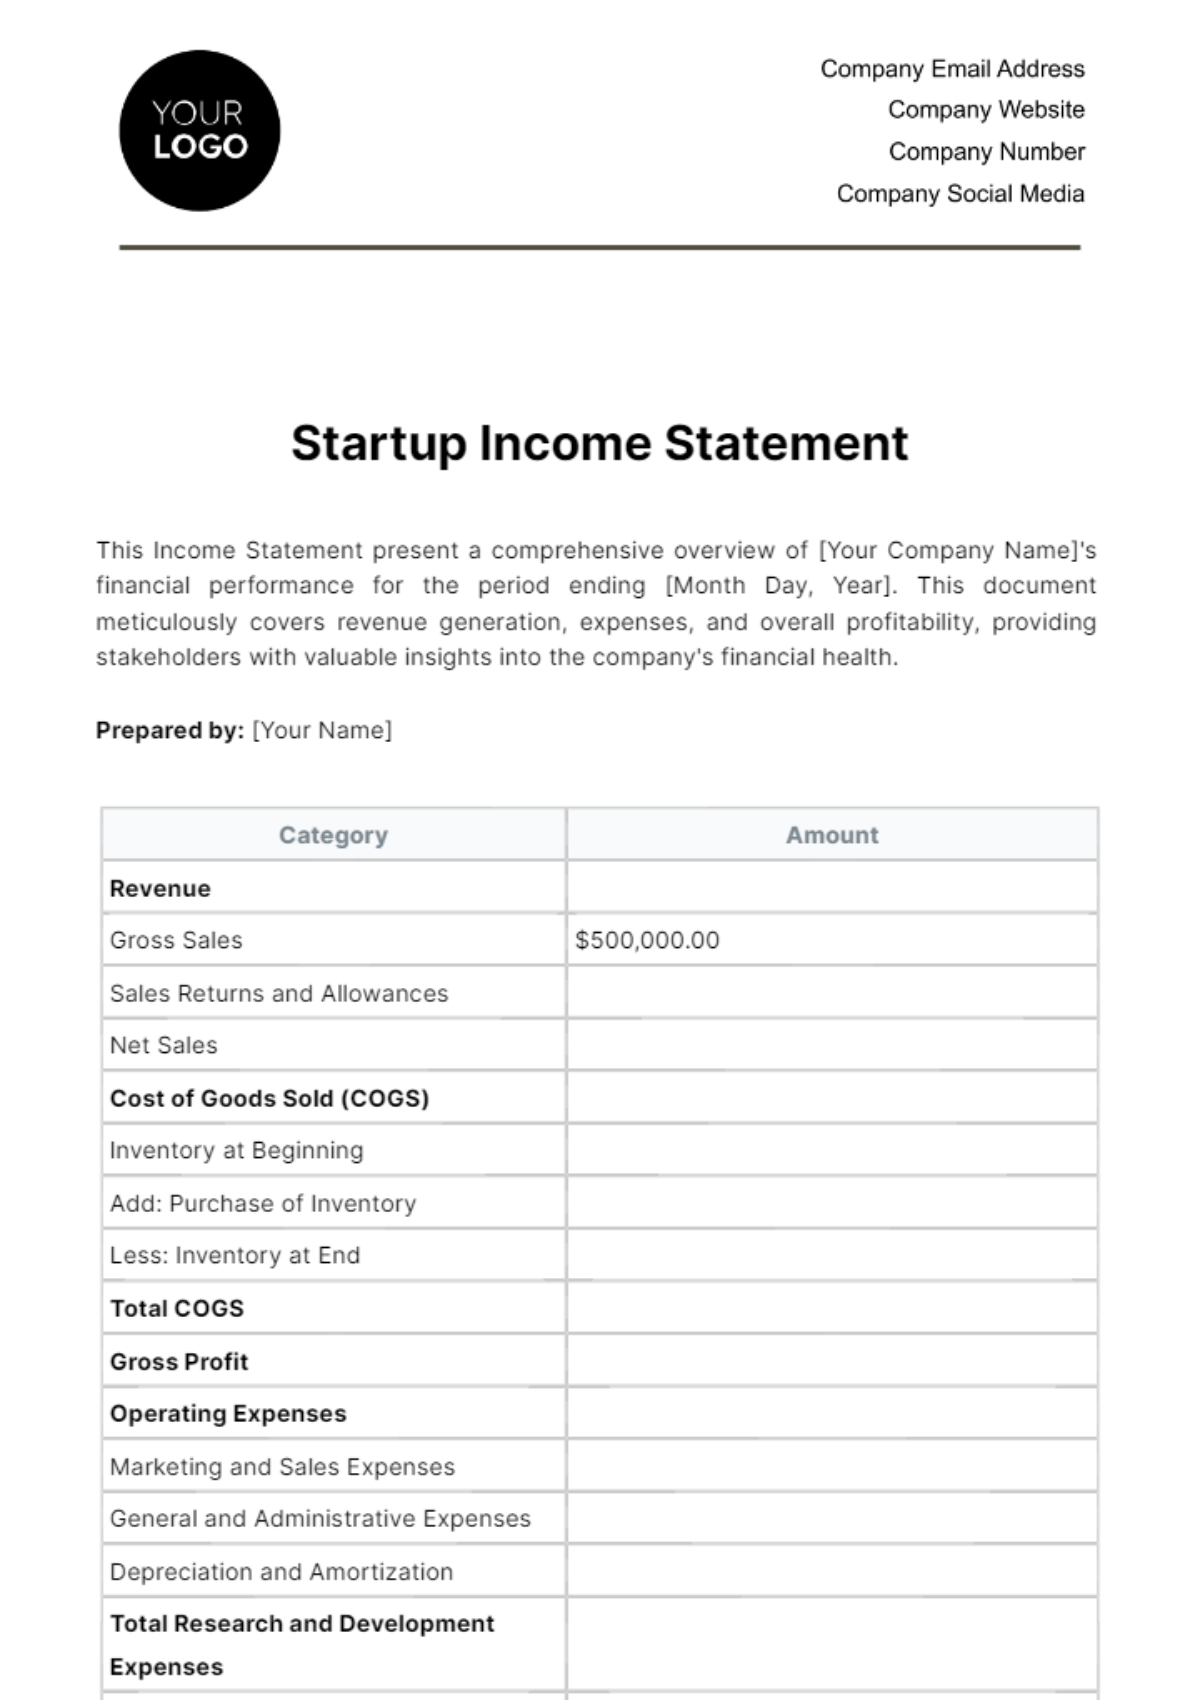 Startup Income Statement Template